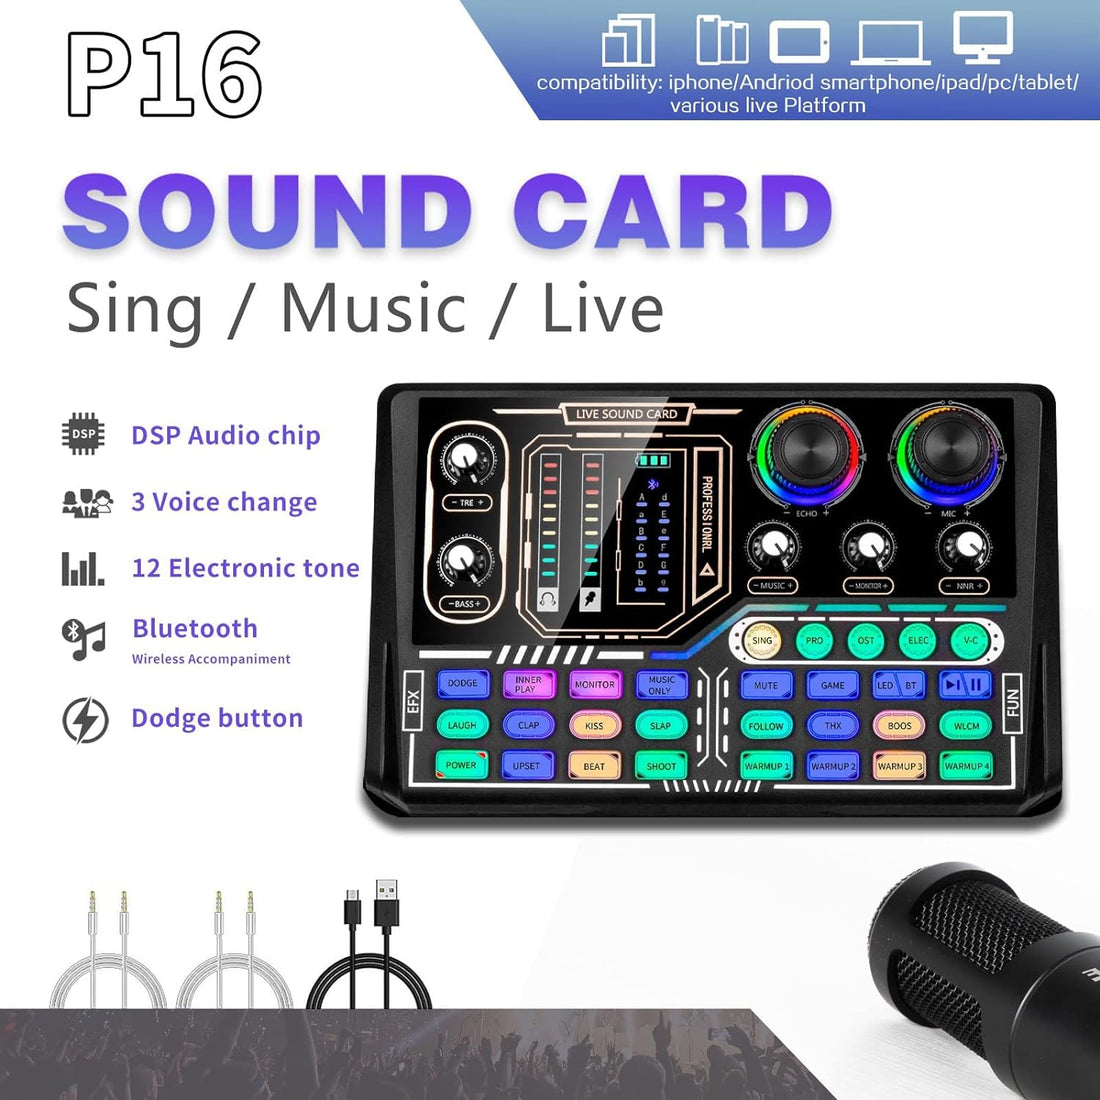 Podcast Equipment Bundle, Sound Card ,Sound Board,Professional DJ Audio Interface Mixer, Portable ALL-IN-ONE Podcast Production Studio with XLR Microphone for Live Streaming, Recording and Gaming